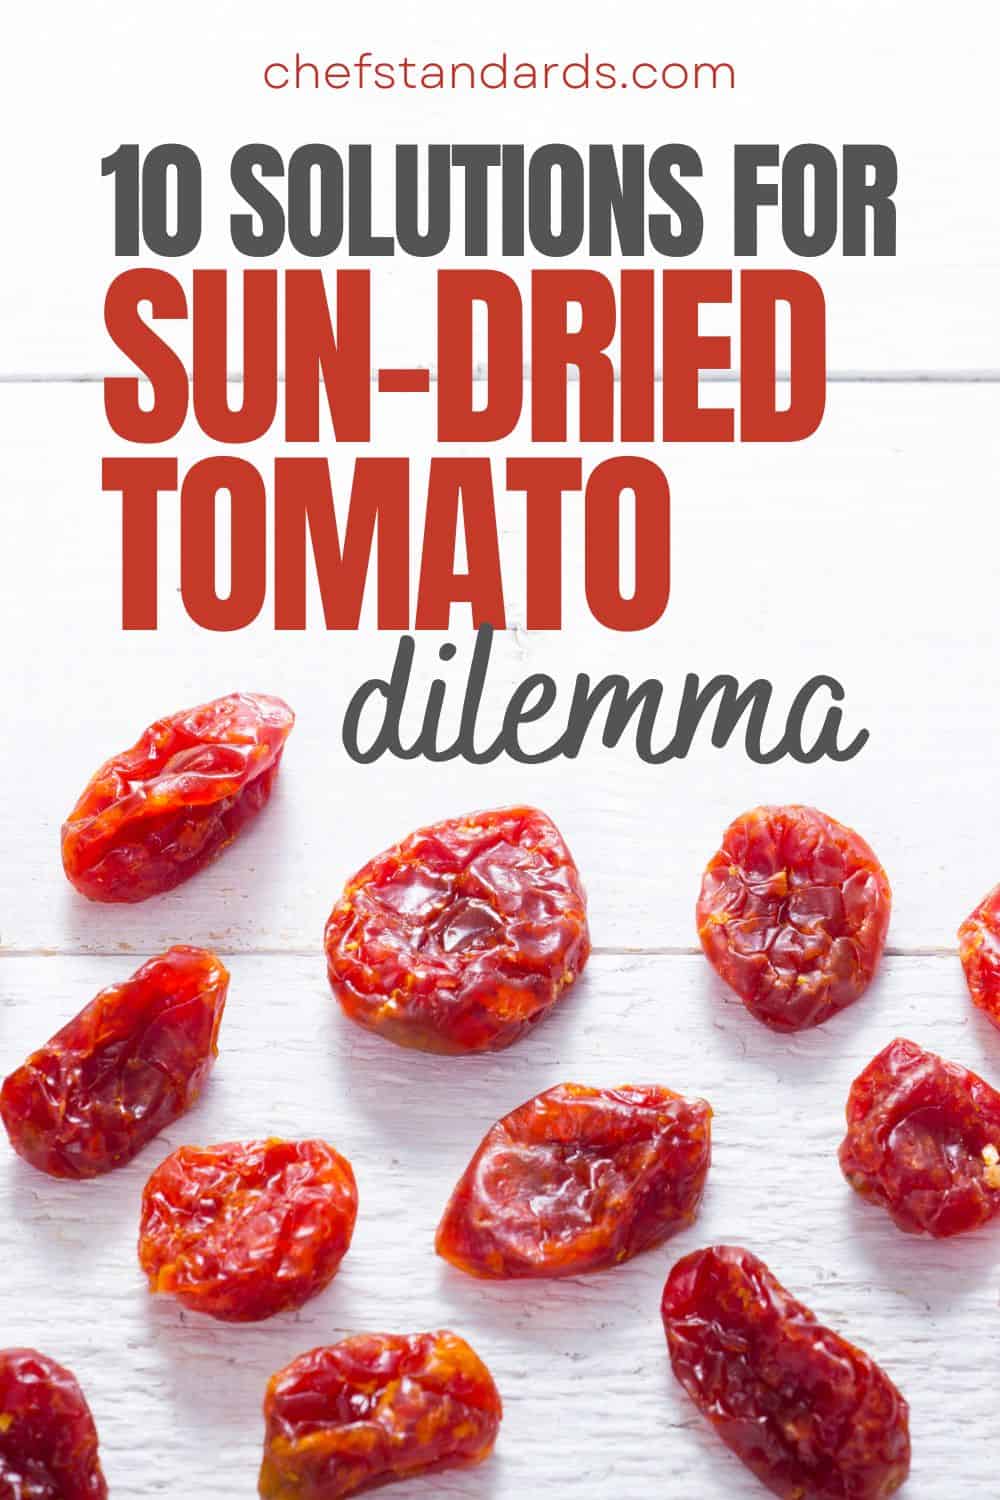 10 Exciting Substitutions For Sun-Dried Tomatoes
